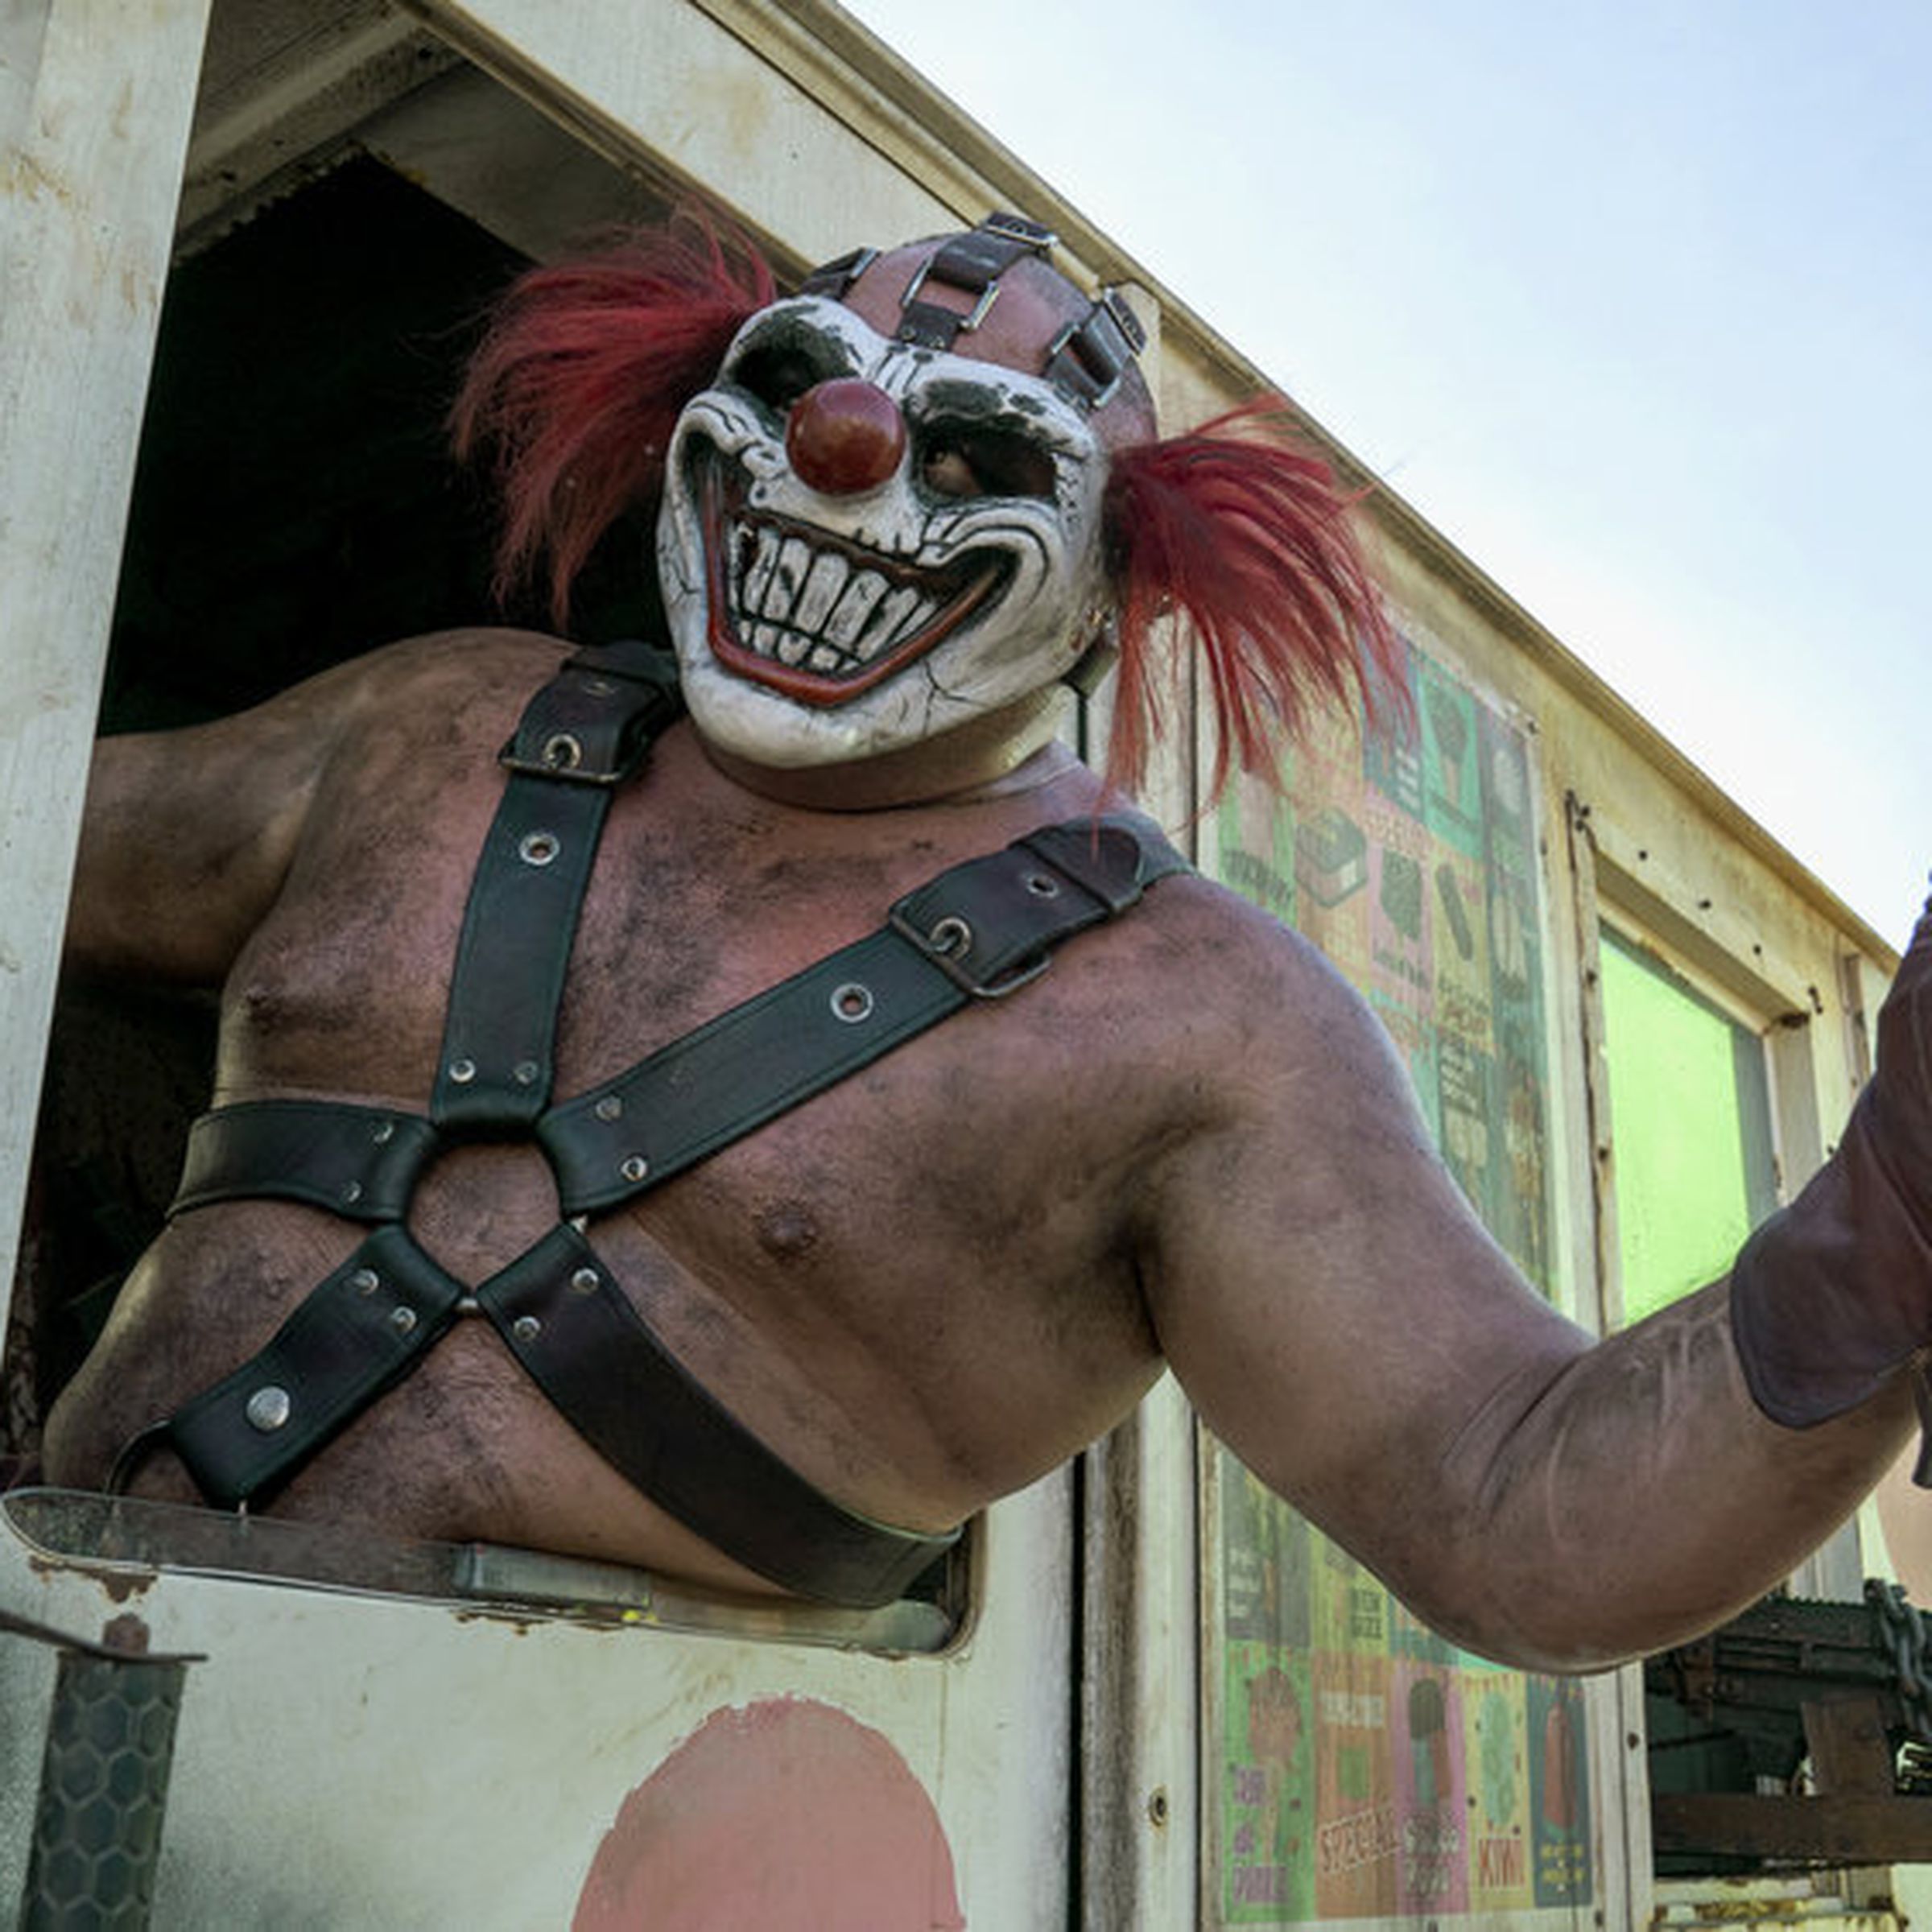 A still photo of the character Sweet Tooth in the TV show Twisted Metal.